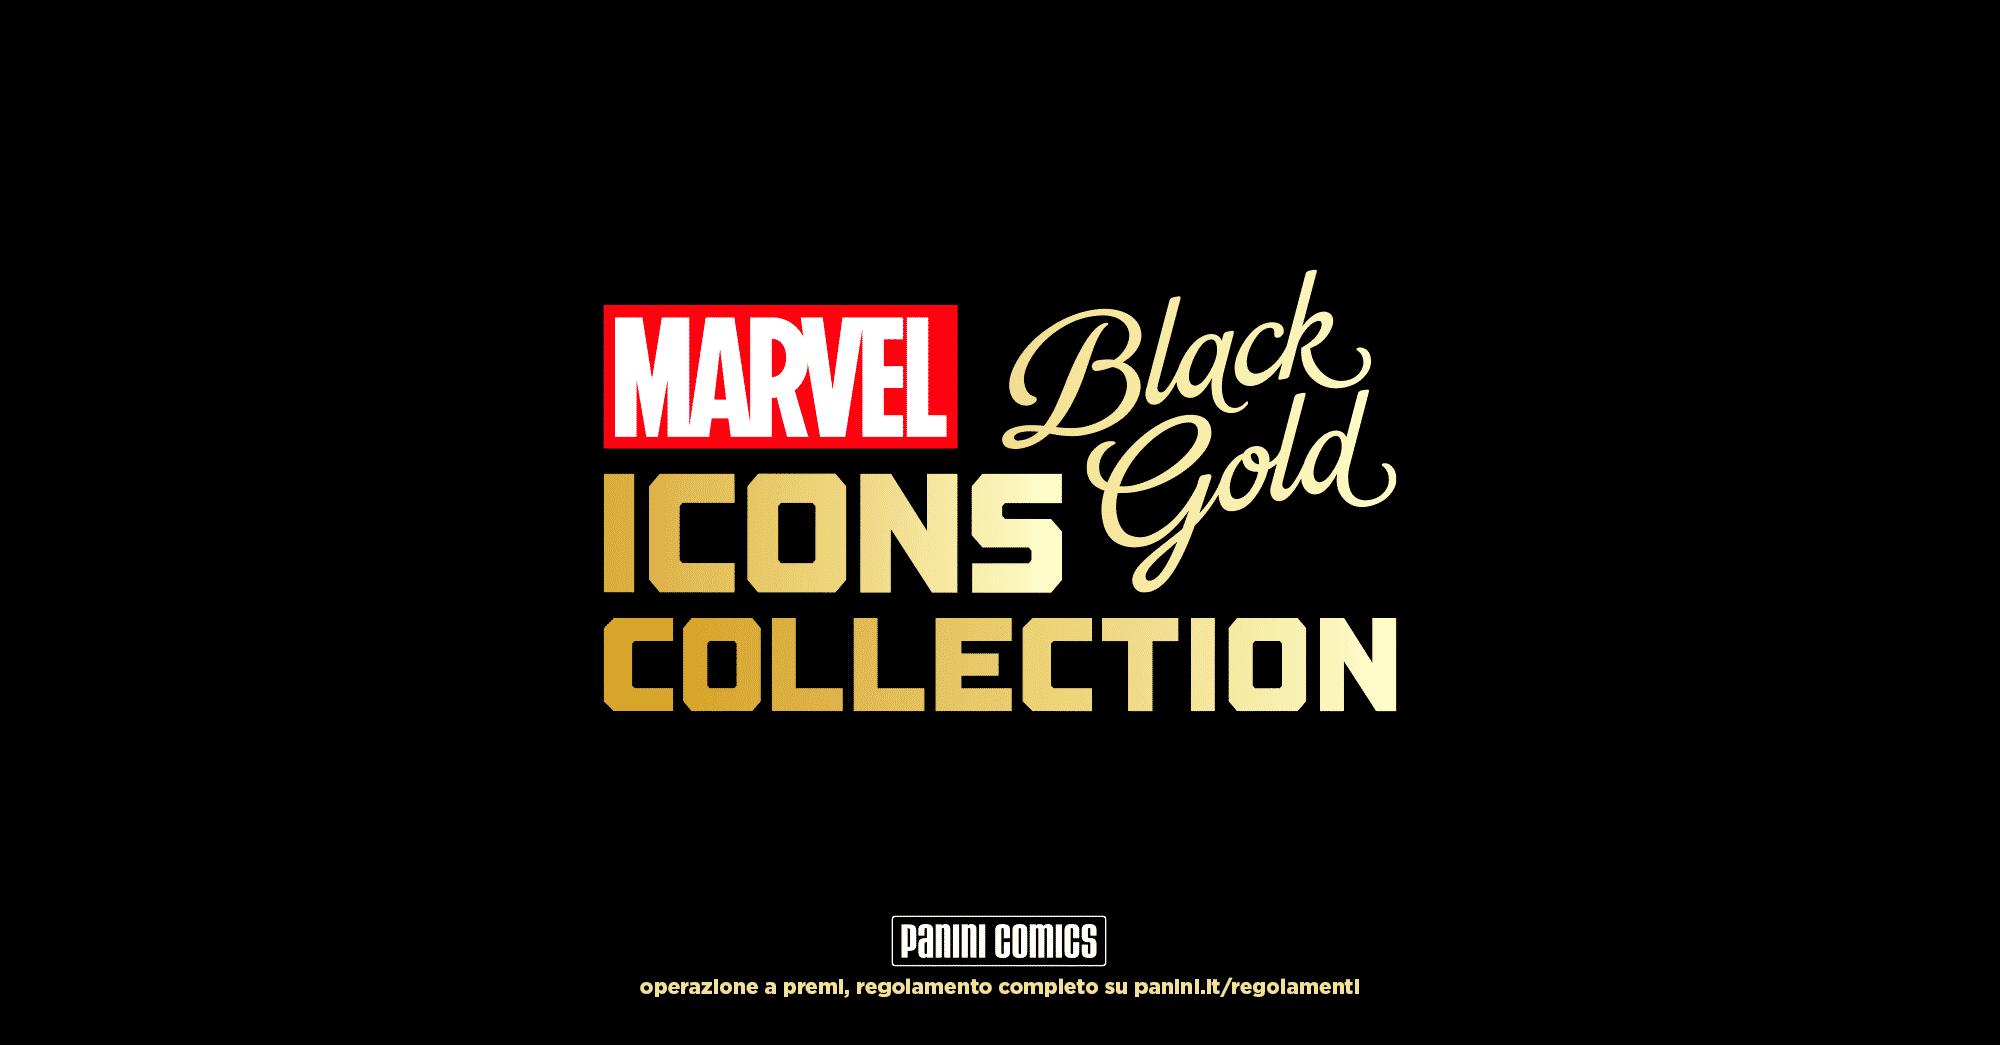 marvel black gold icon collection